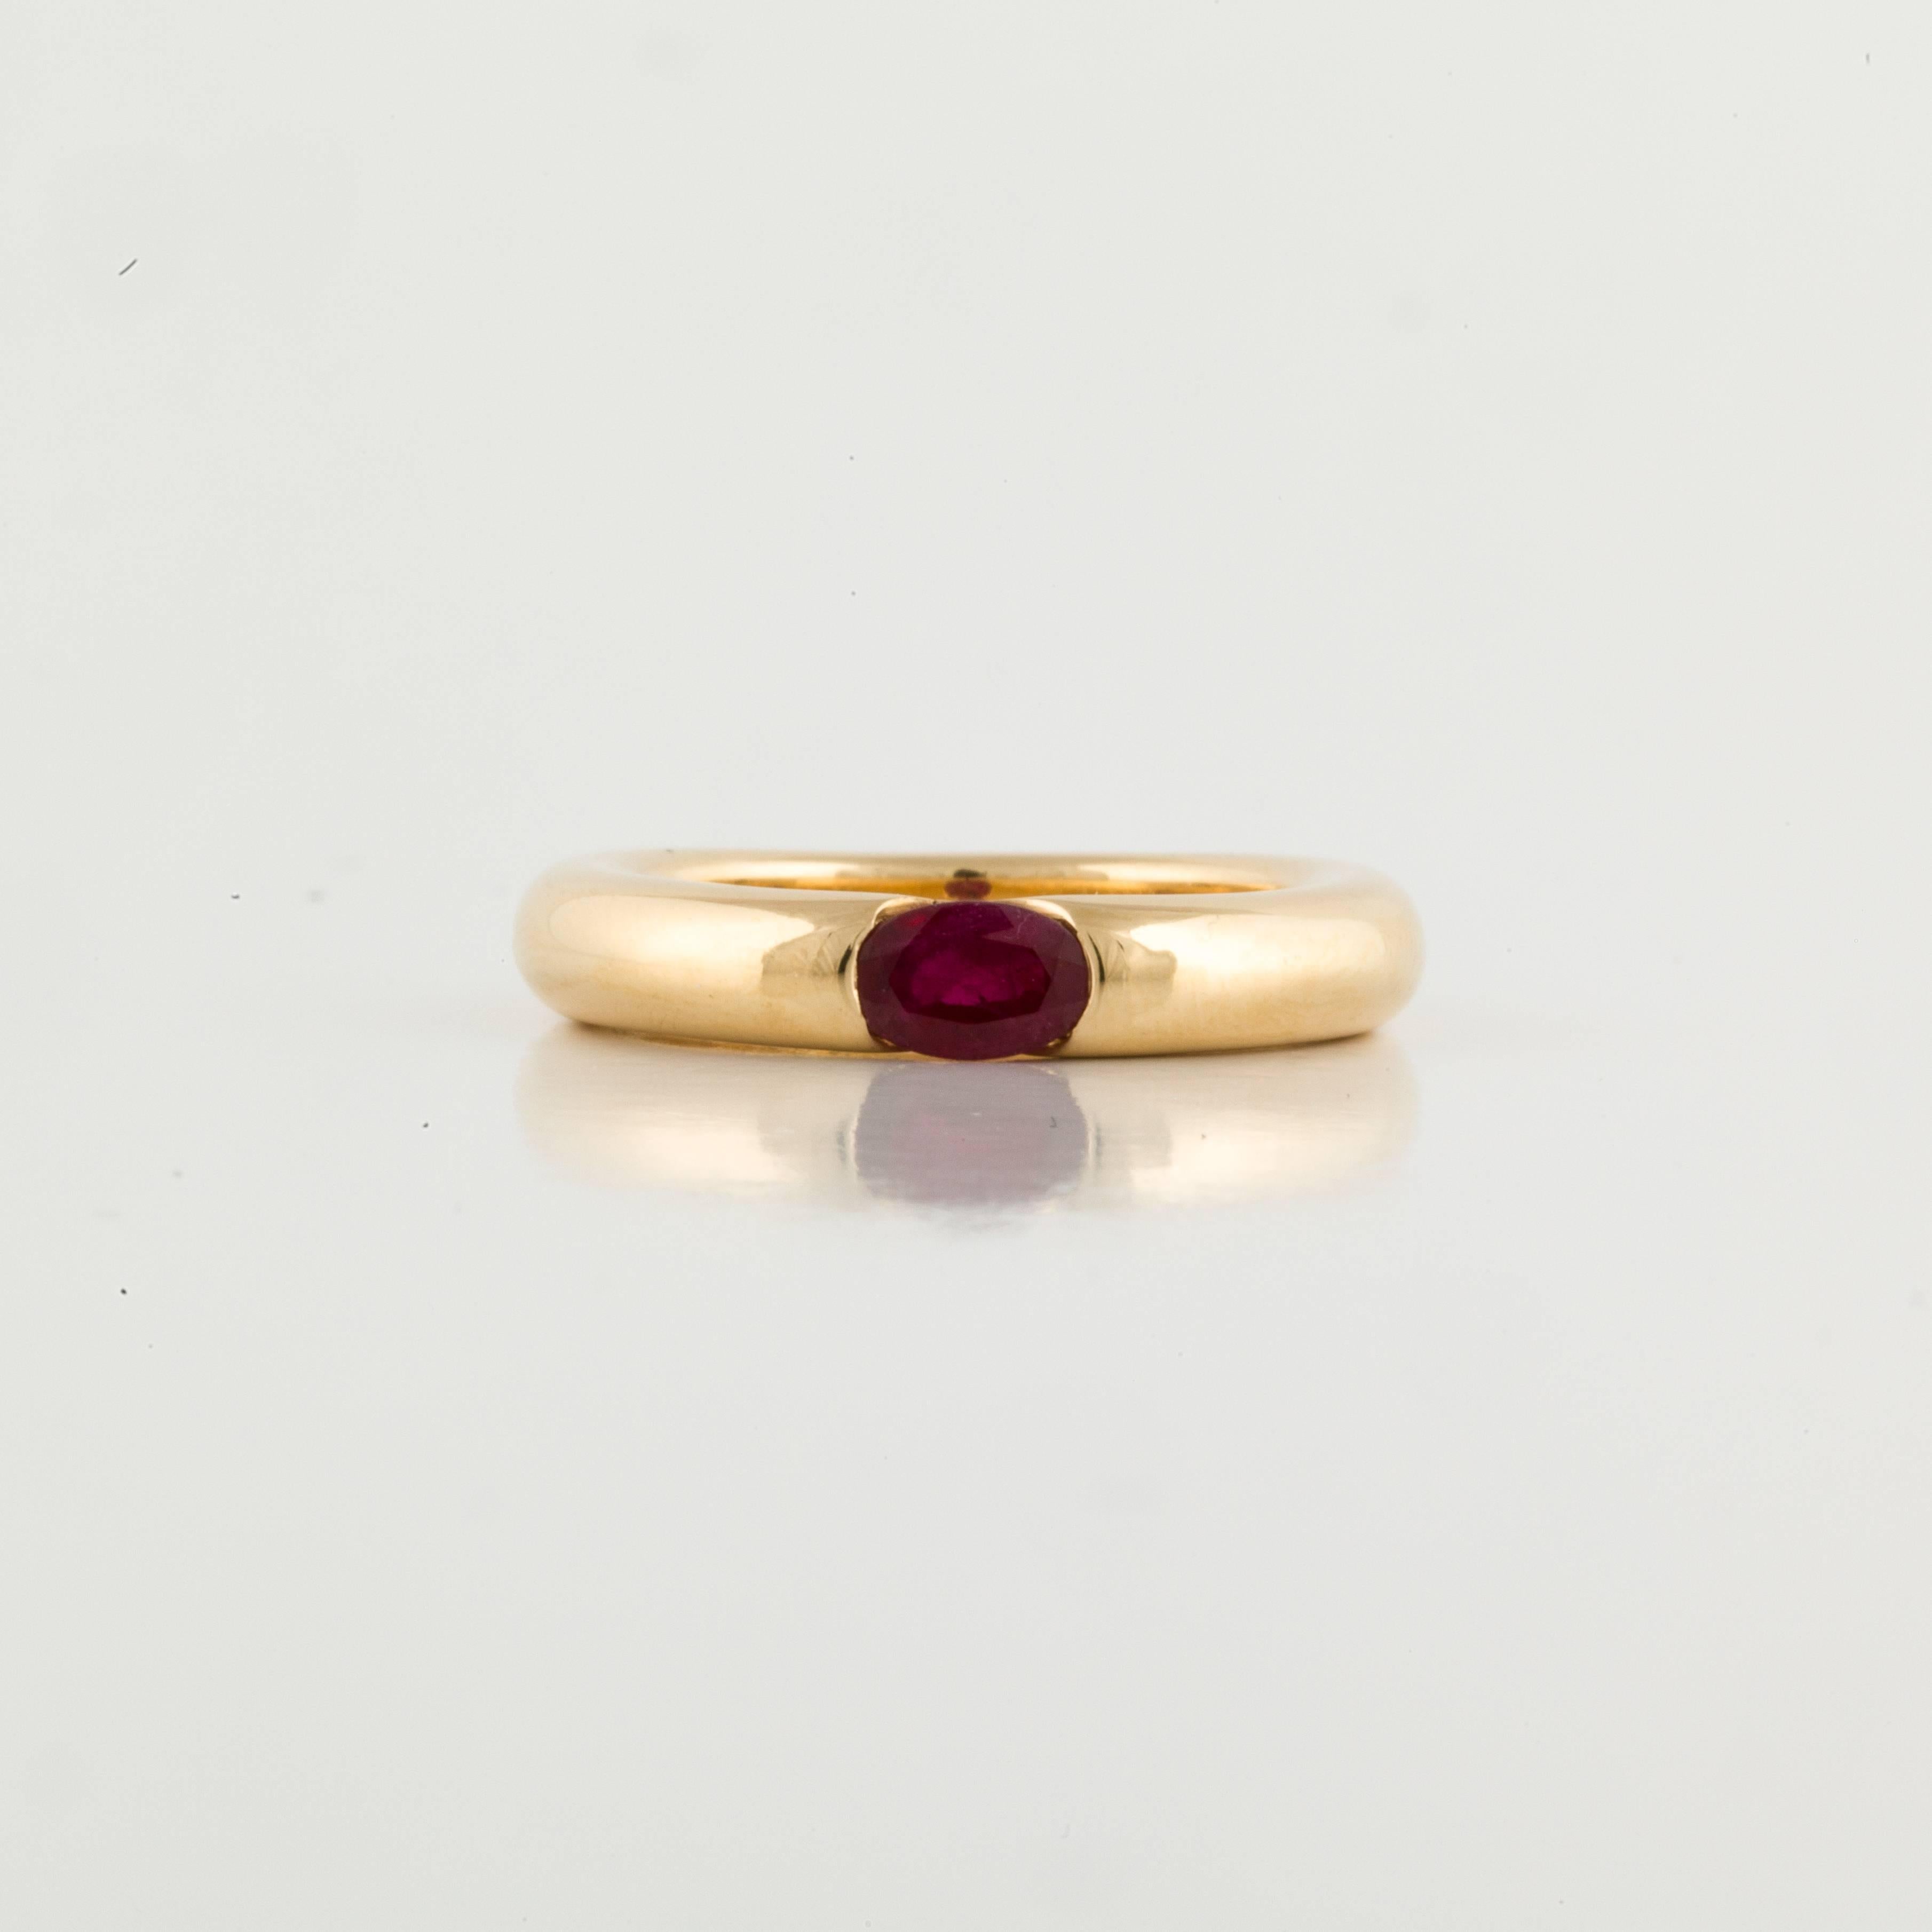 Cartier Ellipse ring in 18K yellow gold featuring an oval faceted ruby. The ring is marked 